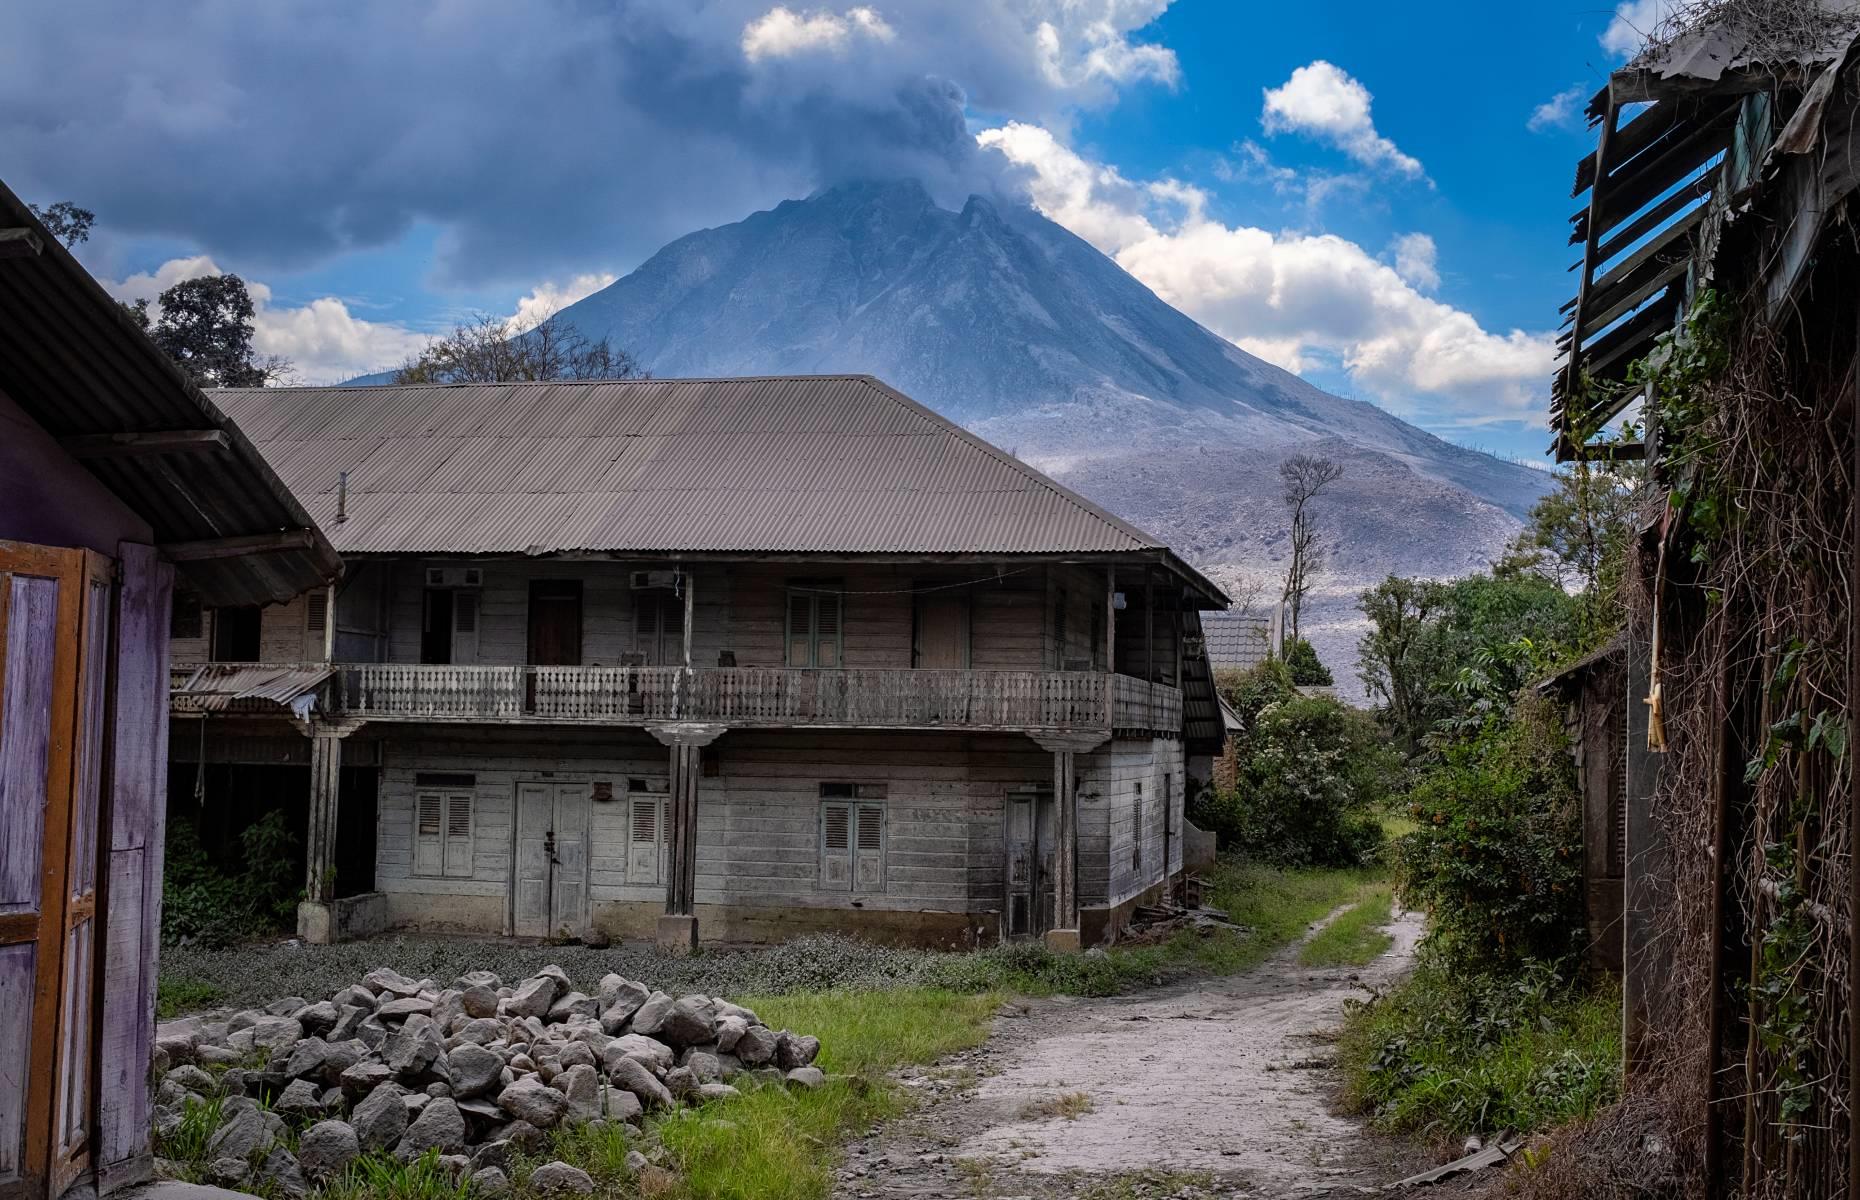 <p>Located in North Sumatra along the Ring of Fire, the 8,530-foot (2,600m) high Mount Sinabung had been dormant for more than 400 years before it broke its quiet spell in 2010. Since then, there have been several major blasts, and in 2014, 16 people died after <a href="https://www.theguardian.com/world/2014/feb/02/indonesian-volcano-eruption-claims-lives-sinabung">authorities allowed evacuated residents to return</a> to their homes prematurely.</p>